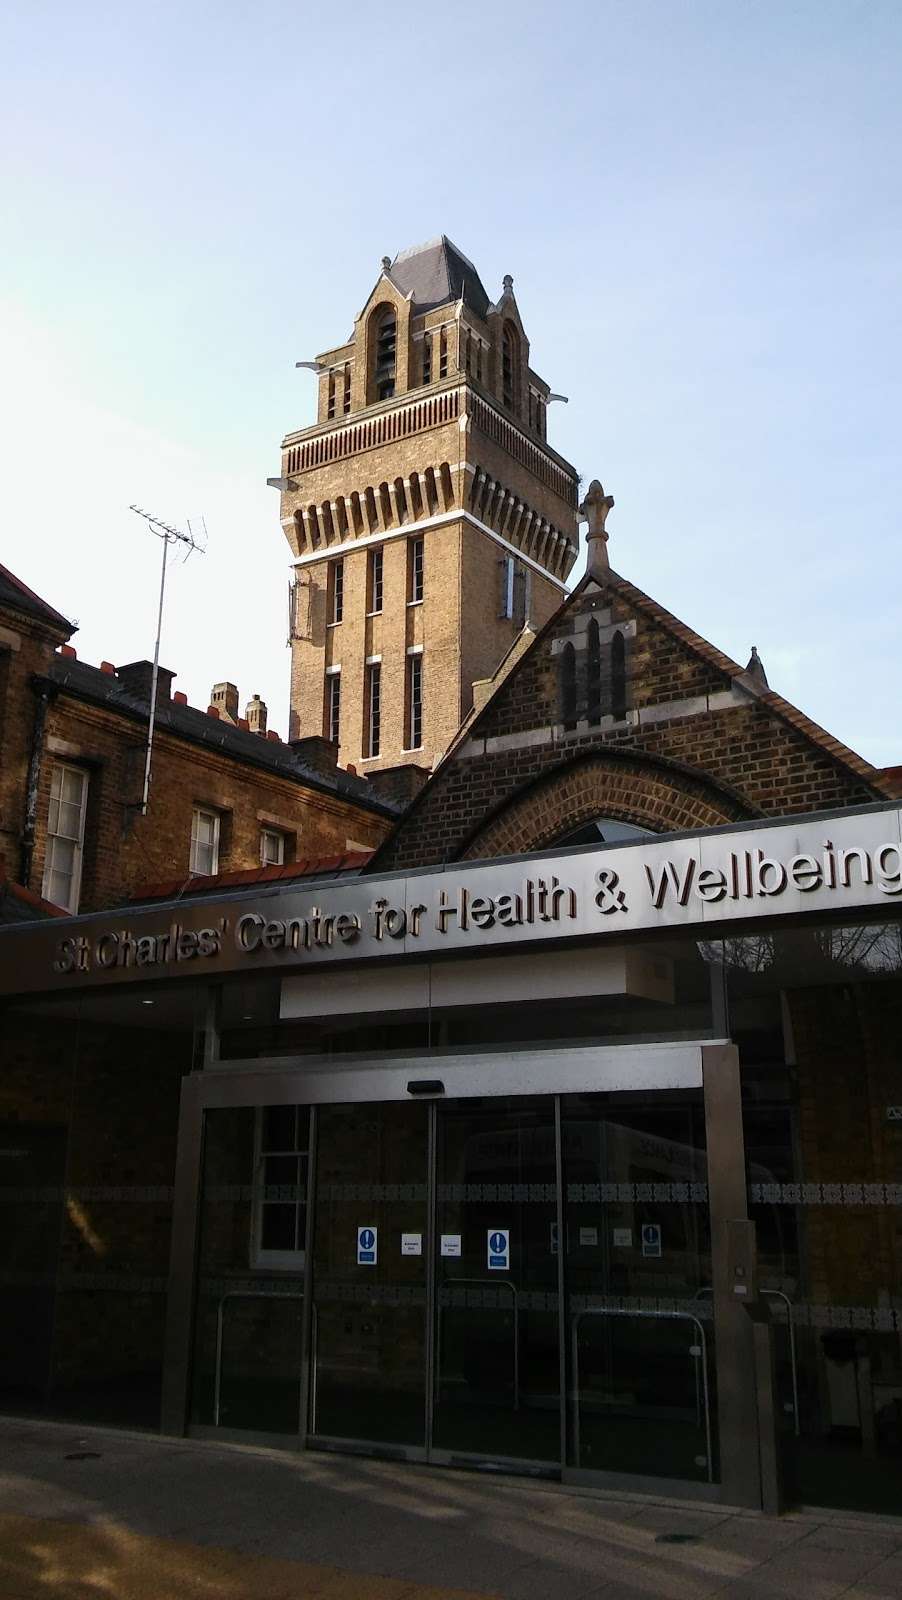 St Charles Centre for Health and Wellbeing | Exmoor St, London W10 6DZ, UK | Phone: 020 8969 2488